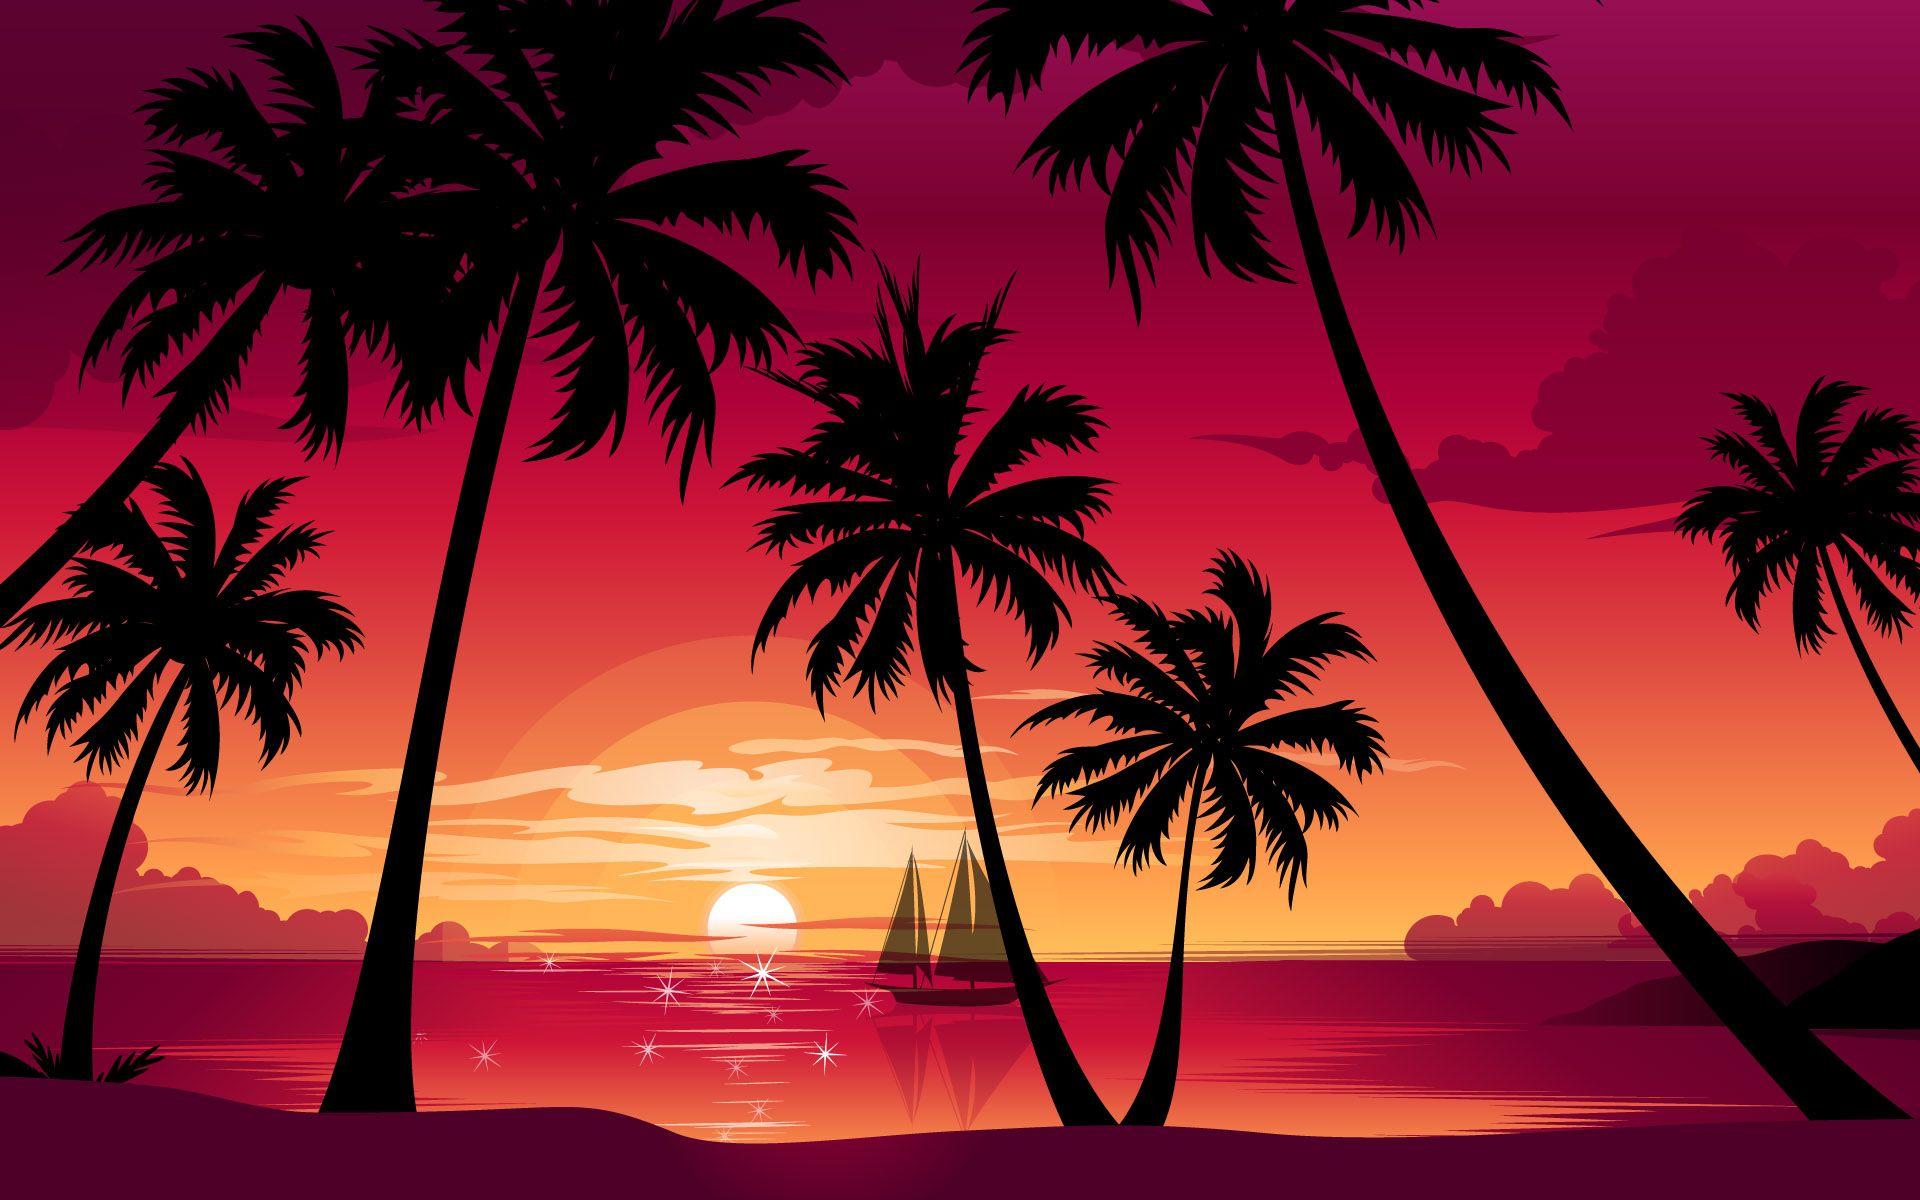 Sunsets, Palm trees and Palms